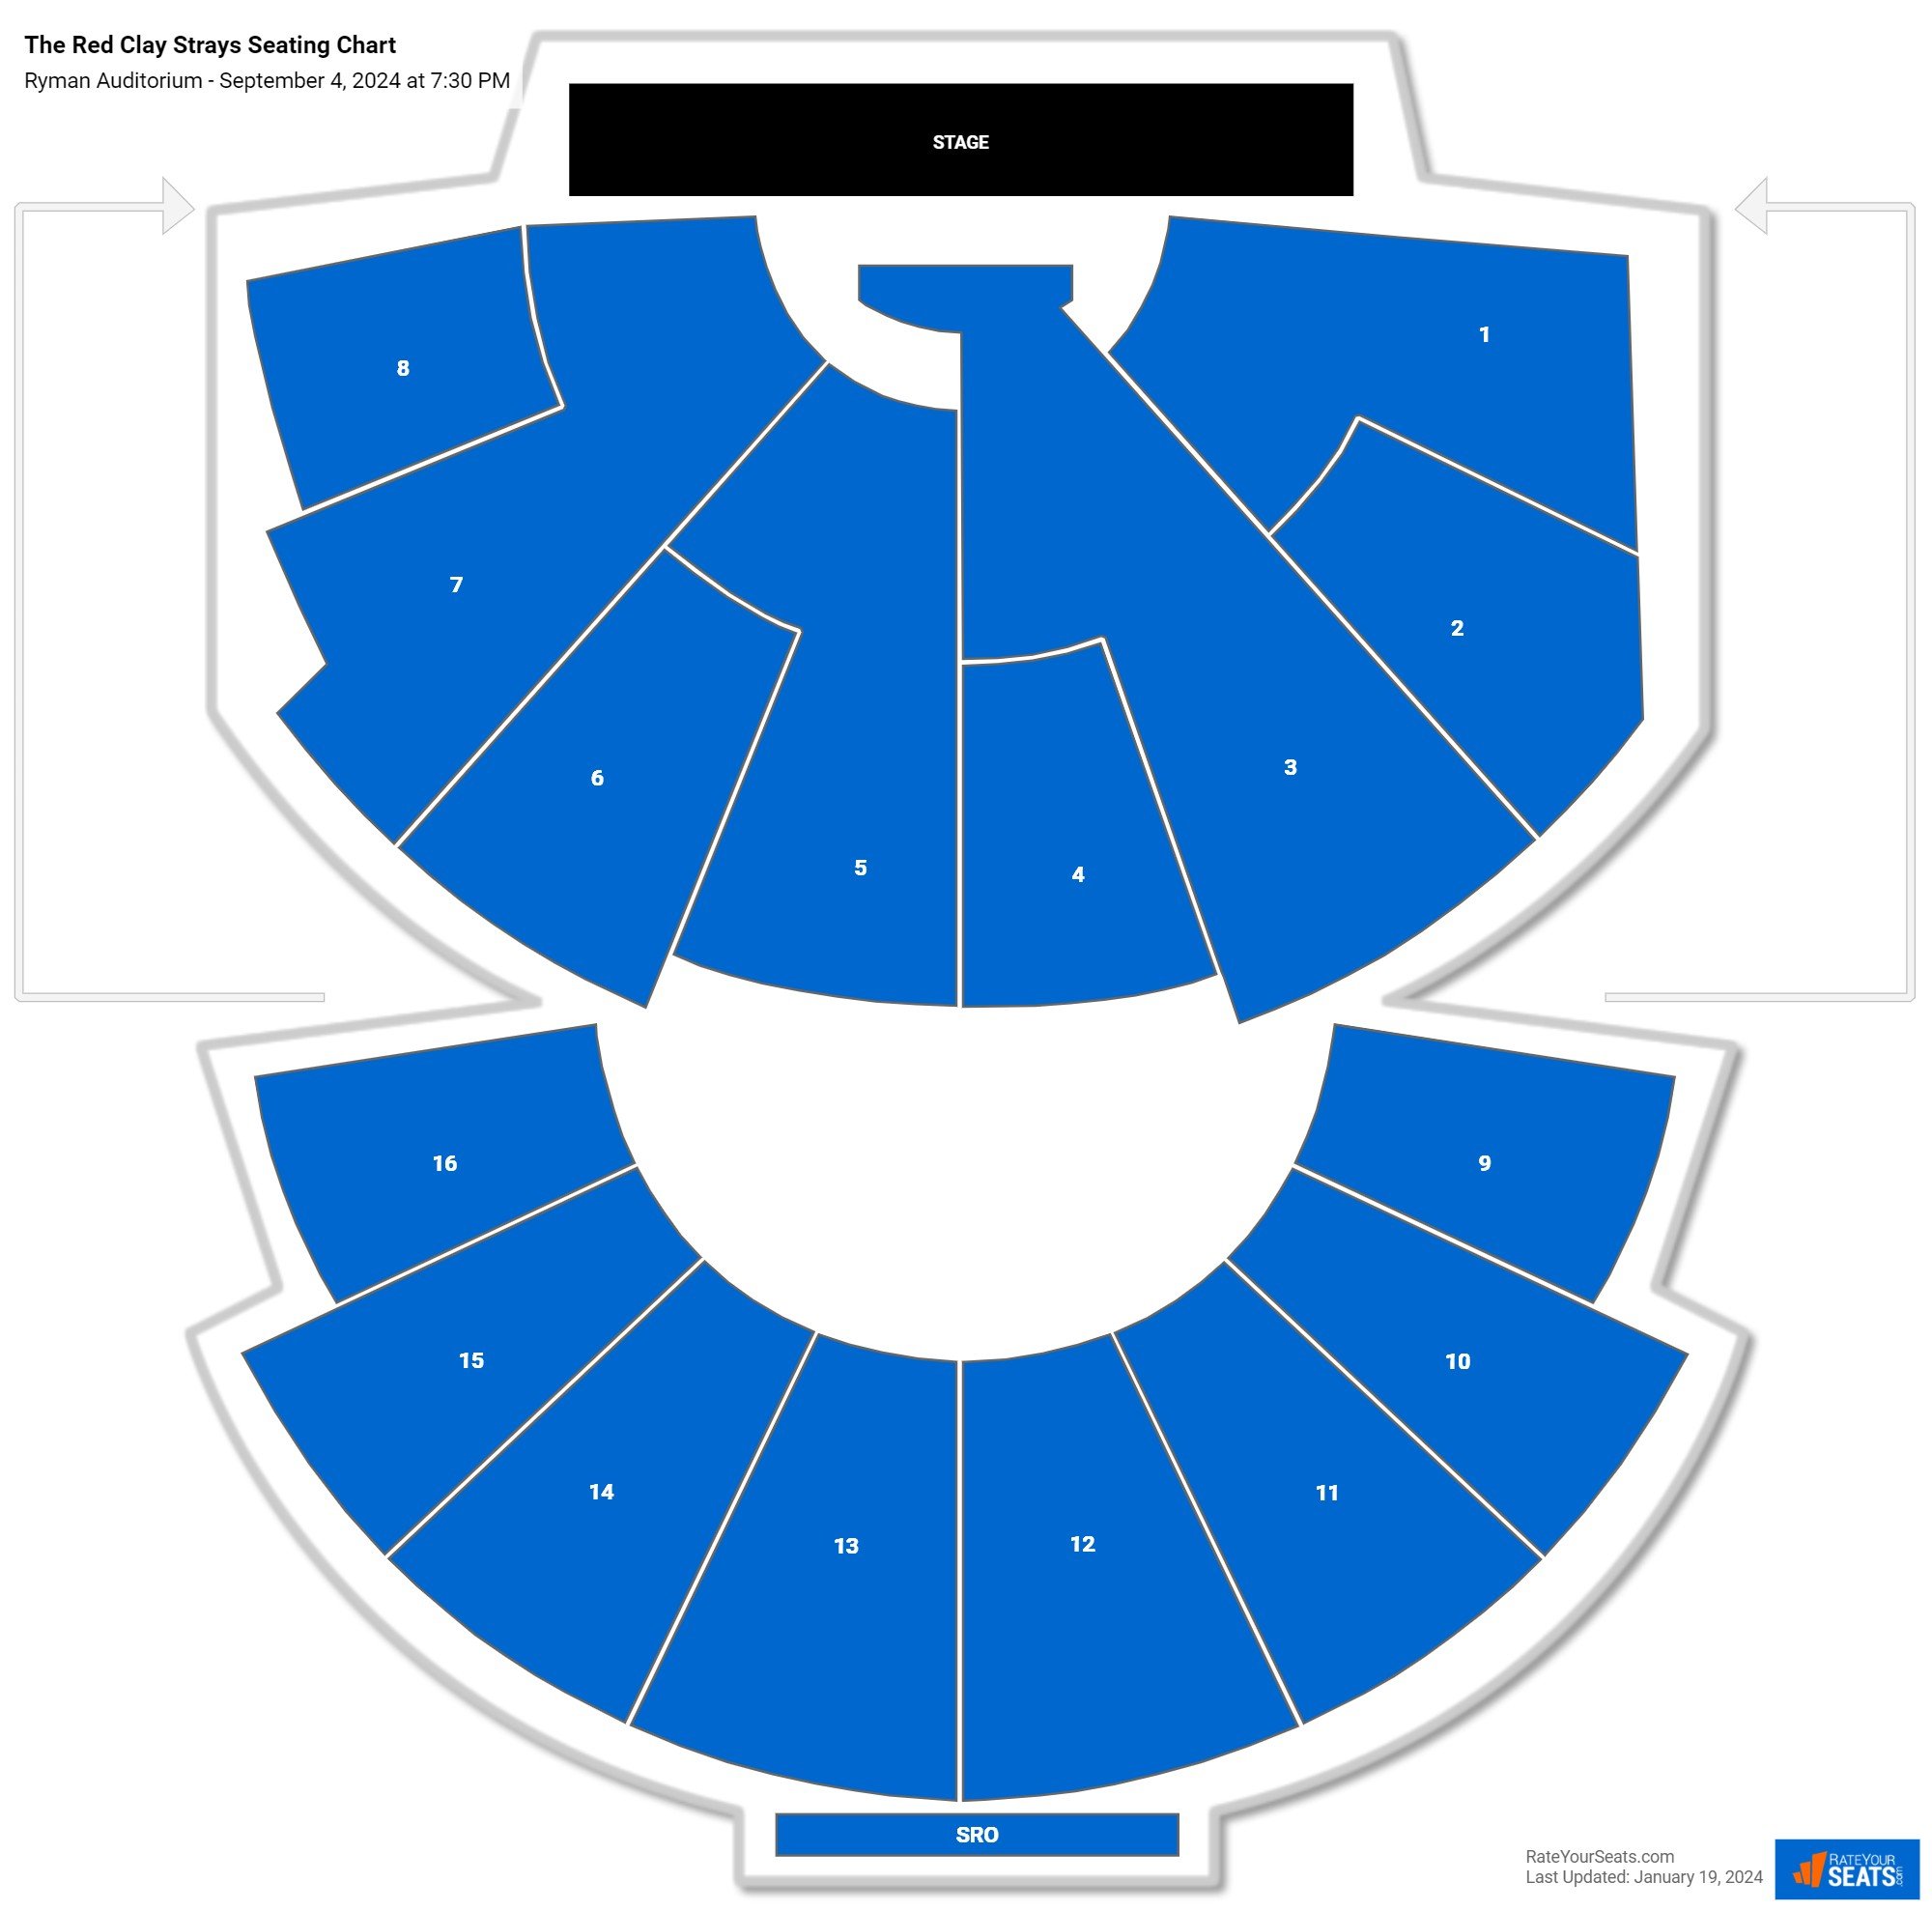 The Red Clay Strays seating chart Ryman Auditorium